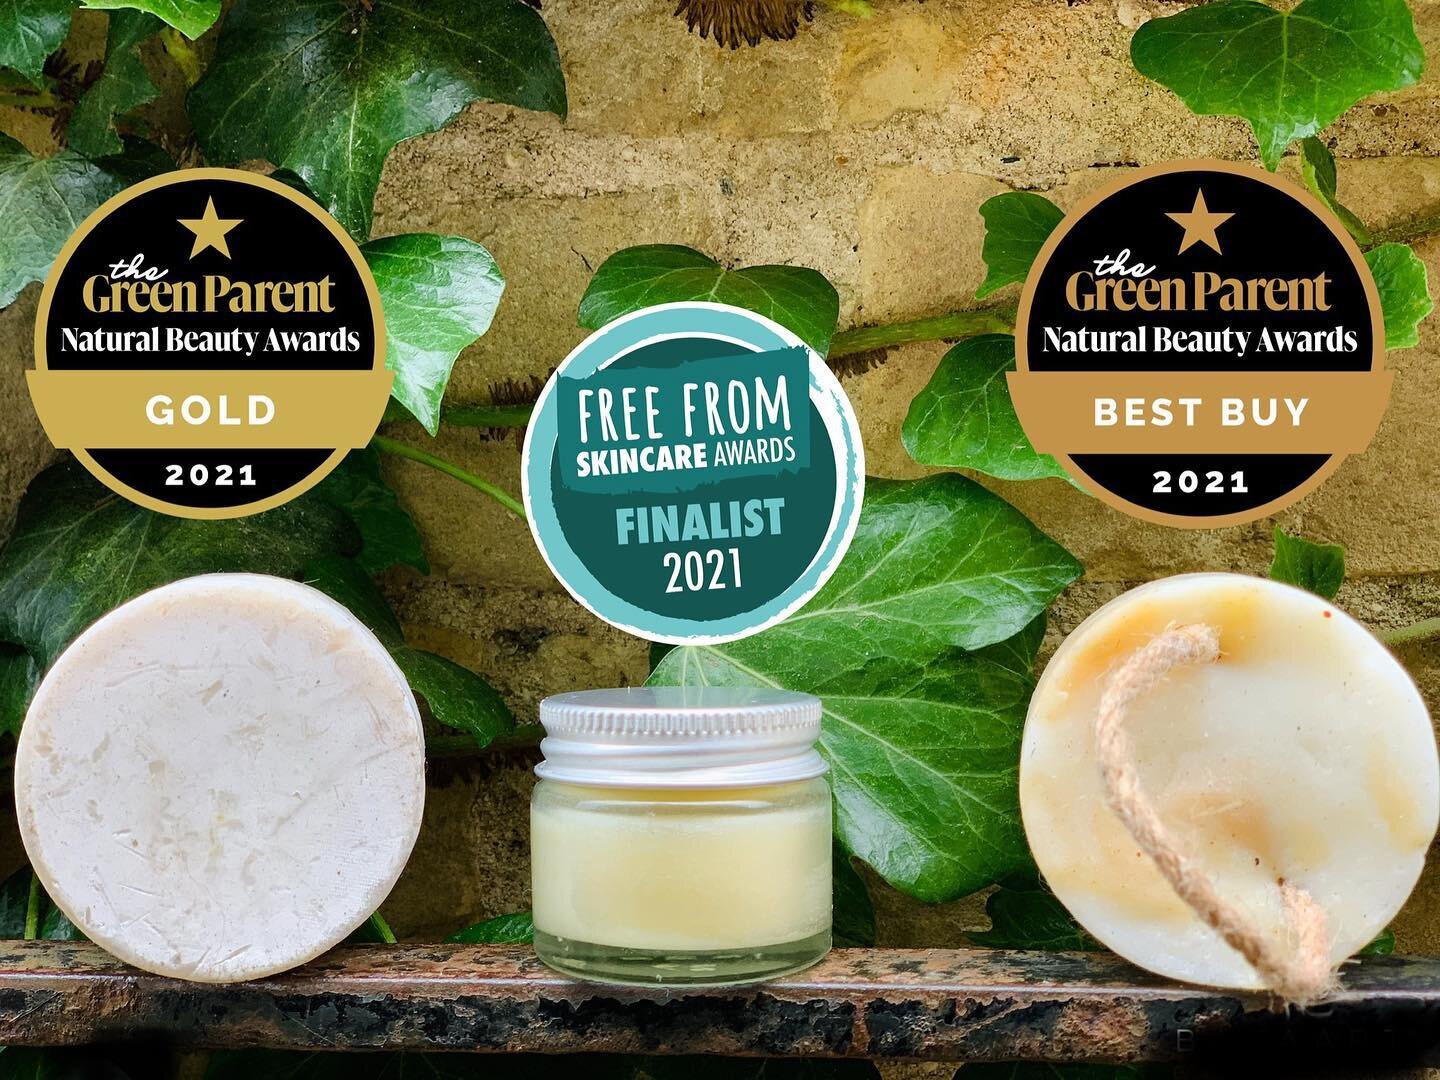 &hearts;️Feeling so thrilled to share some very exciting news regarding some of our products&hearts;️
🥁 Drum roll....
🥇Gold Award for our SHAVING SOAP,  The Green Parent, Natural Beauty Awards 2021 
🎊Best Buy Award for our SHAMPOO BAR, The Green P